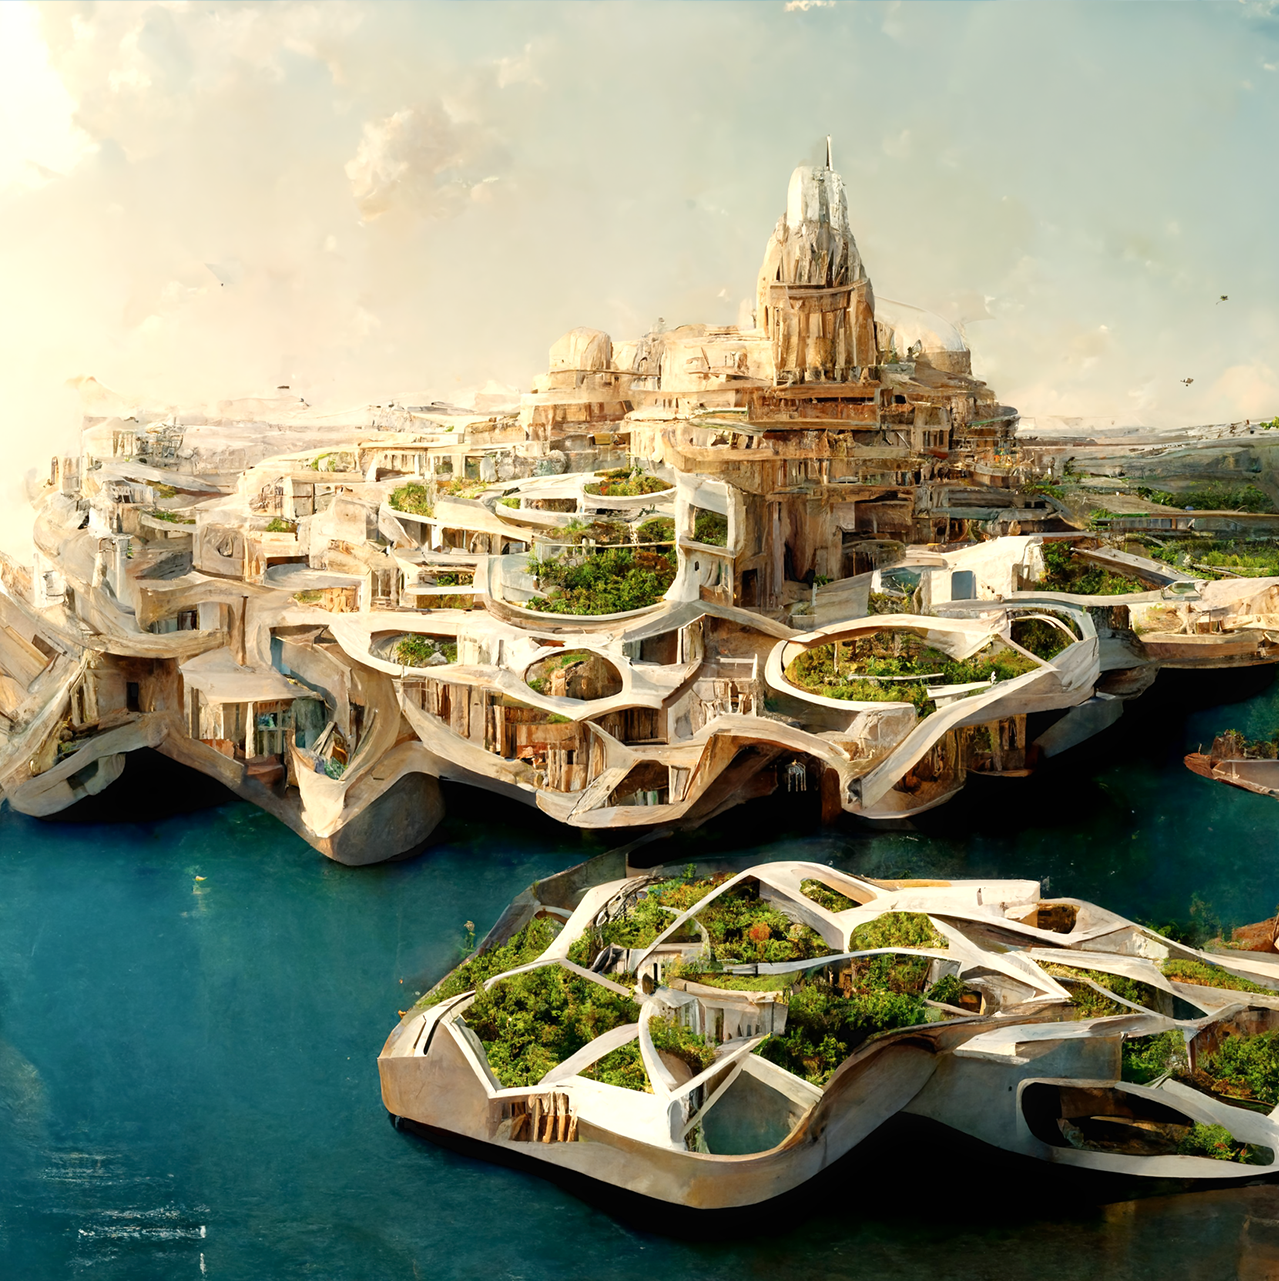 The City of 2066